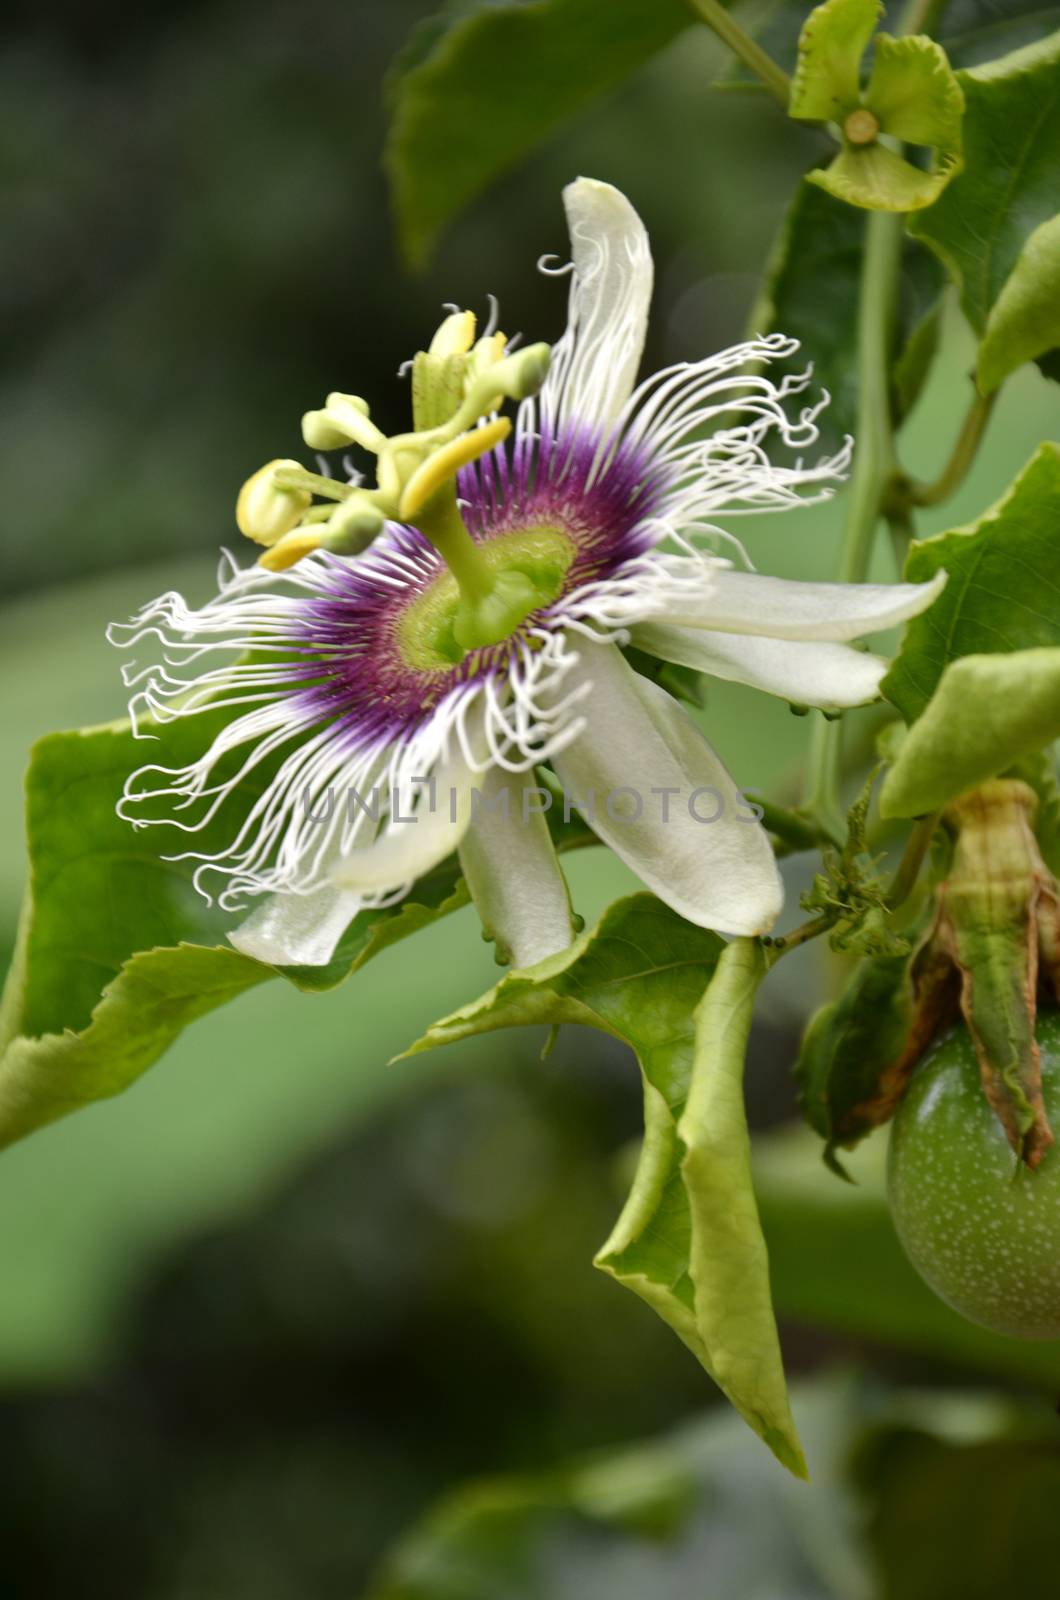 Photography of passion fruit flower on the tree by tang90246